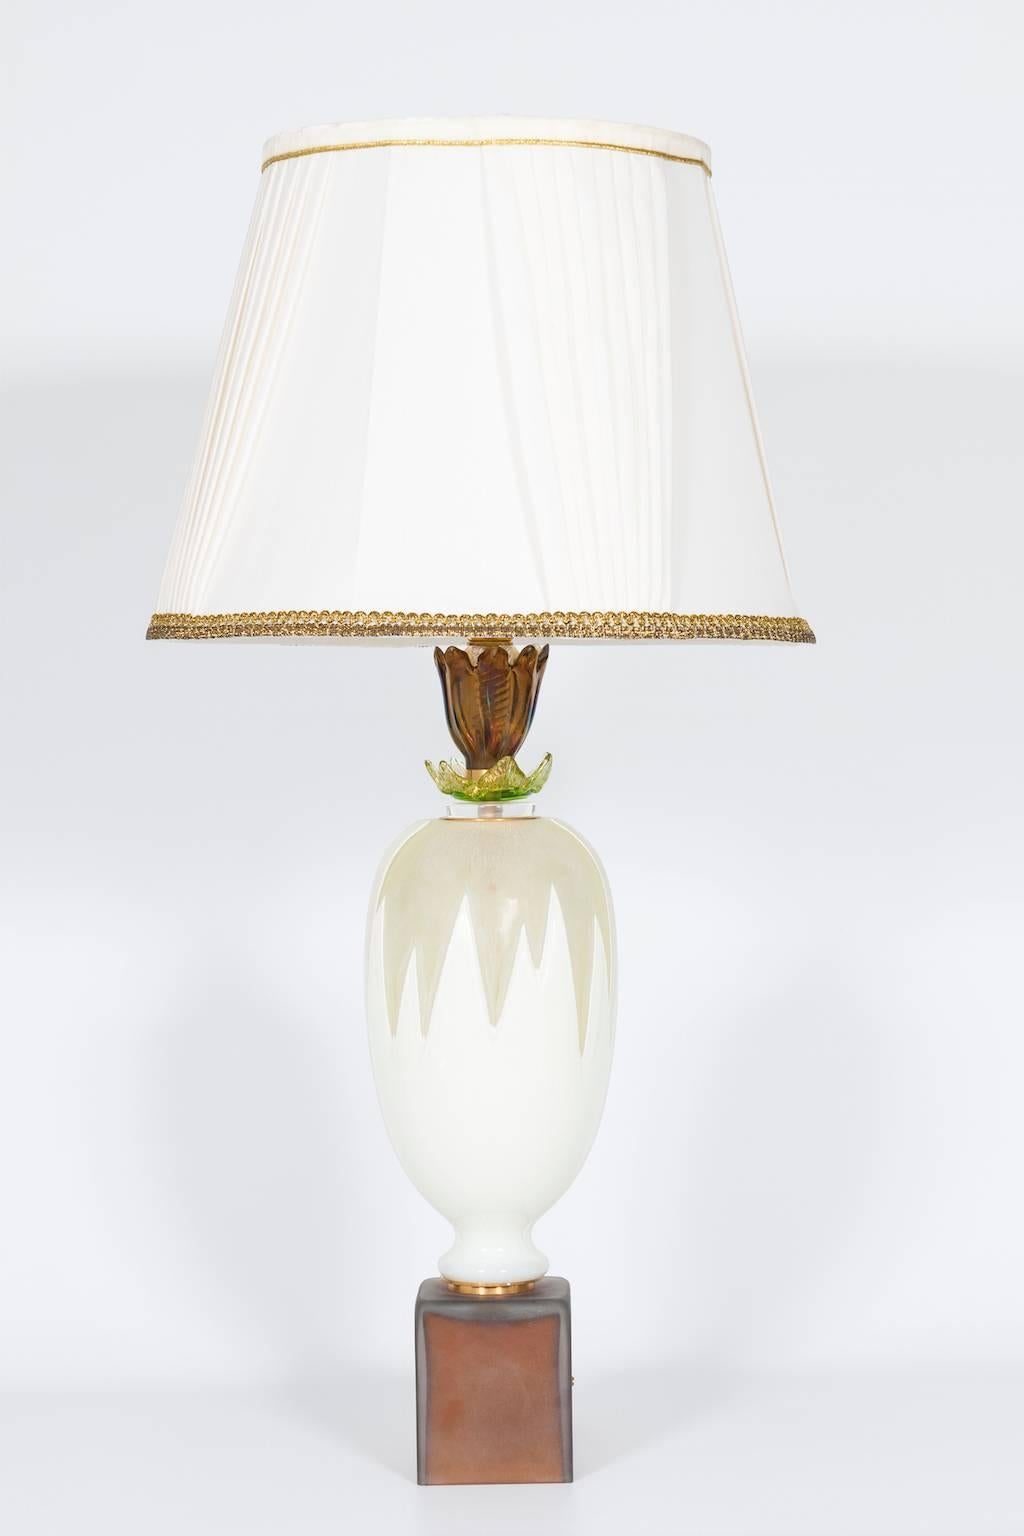 Unique Italian Murano glass table lamp in colors amber, white and green, in excellent condition, contemporary art, circa 2010s. The table lamp is 24.41 inches high, by 7.09 inches diameter and having one light.

We can professionally rewire this